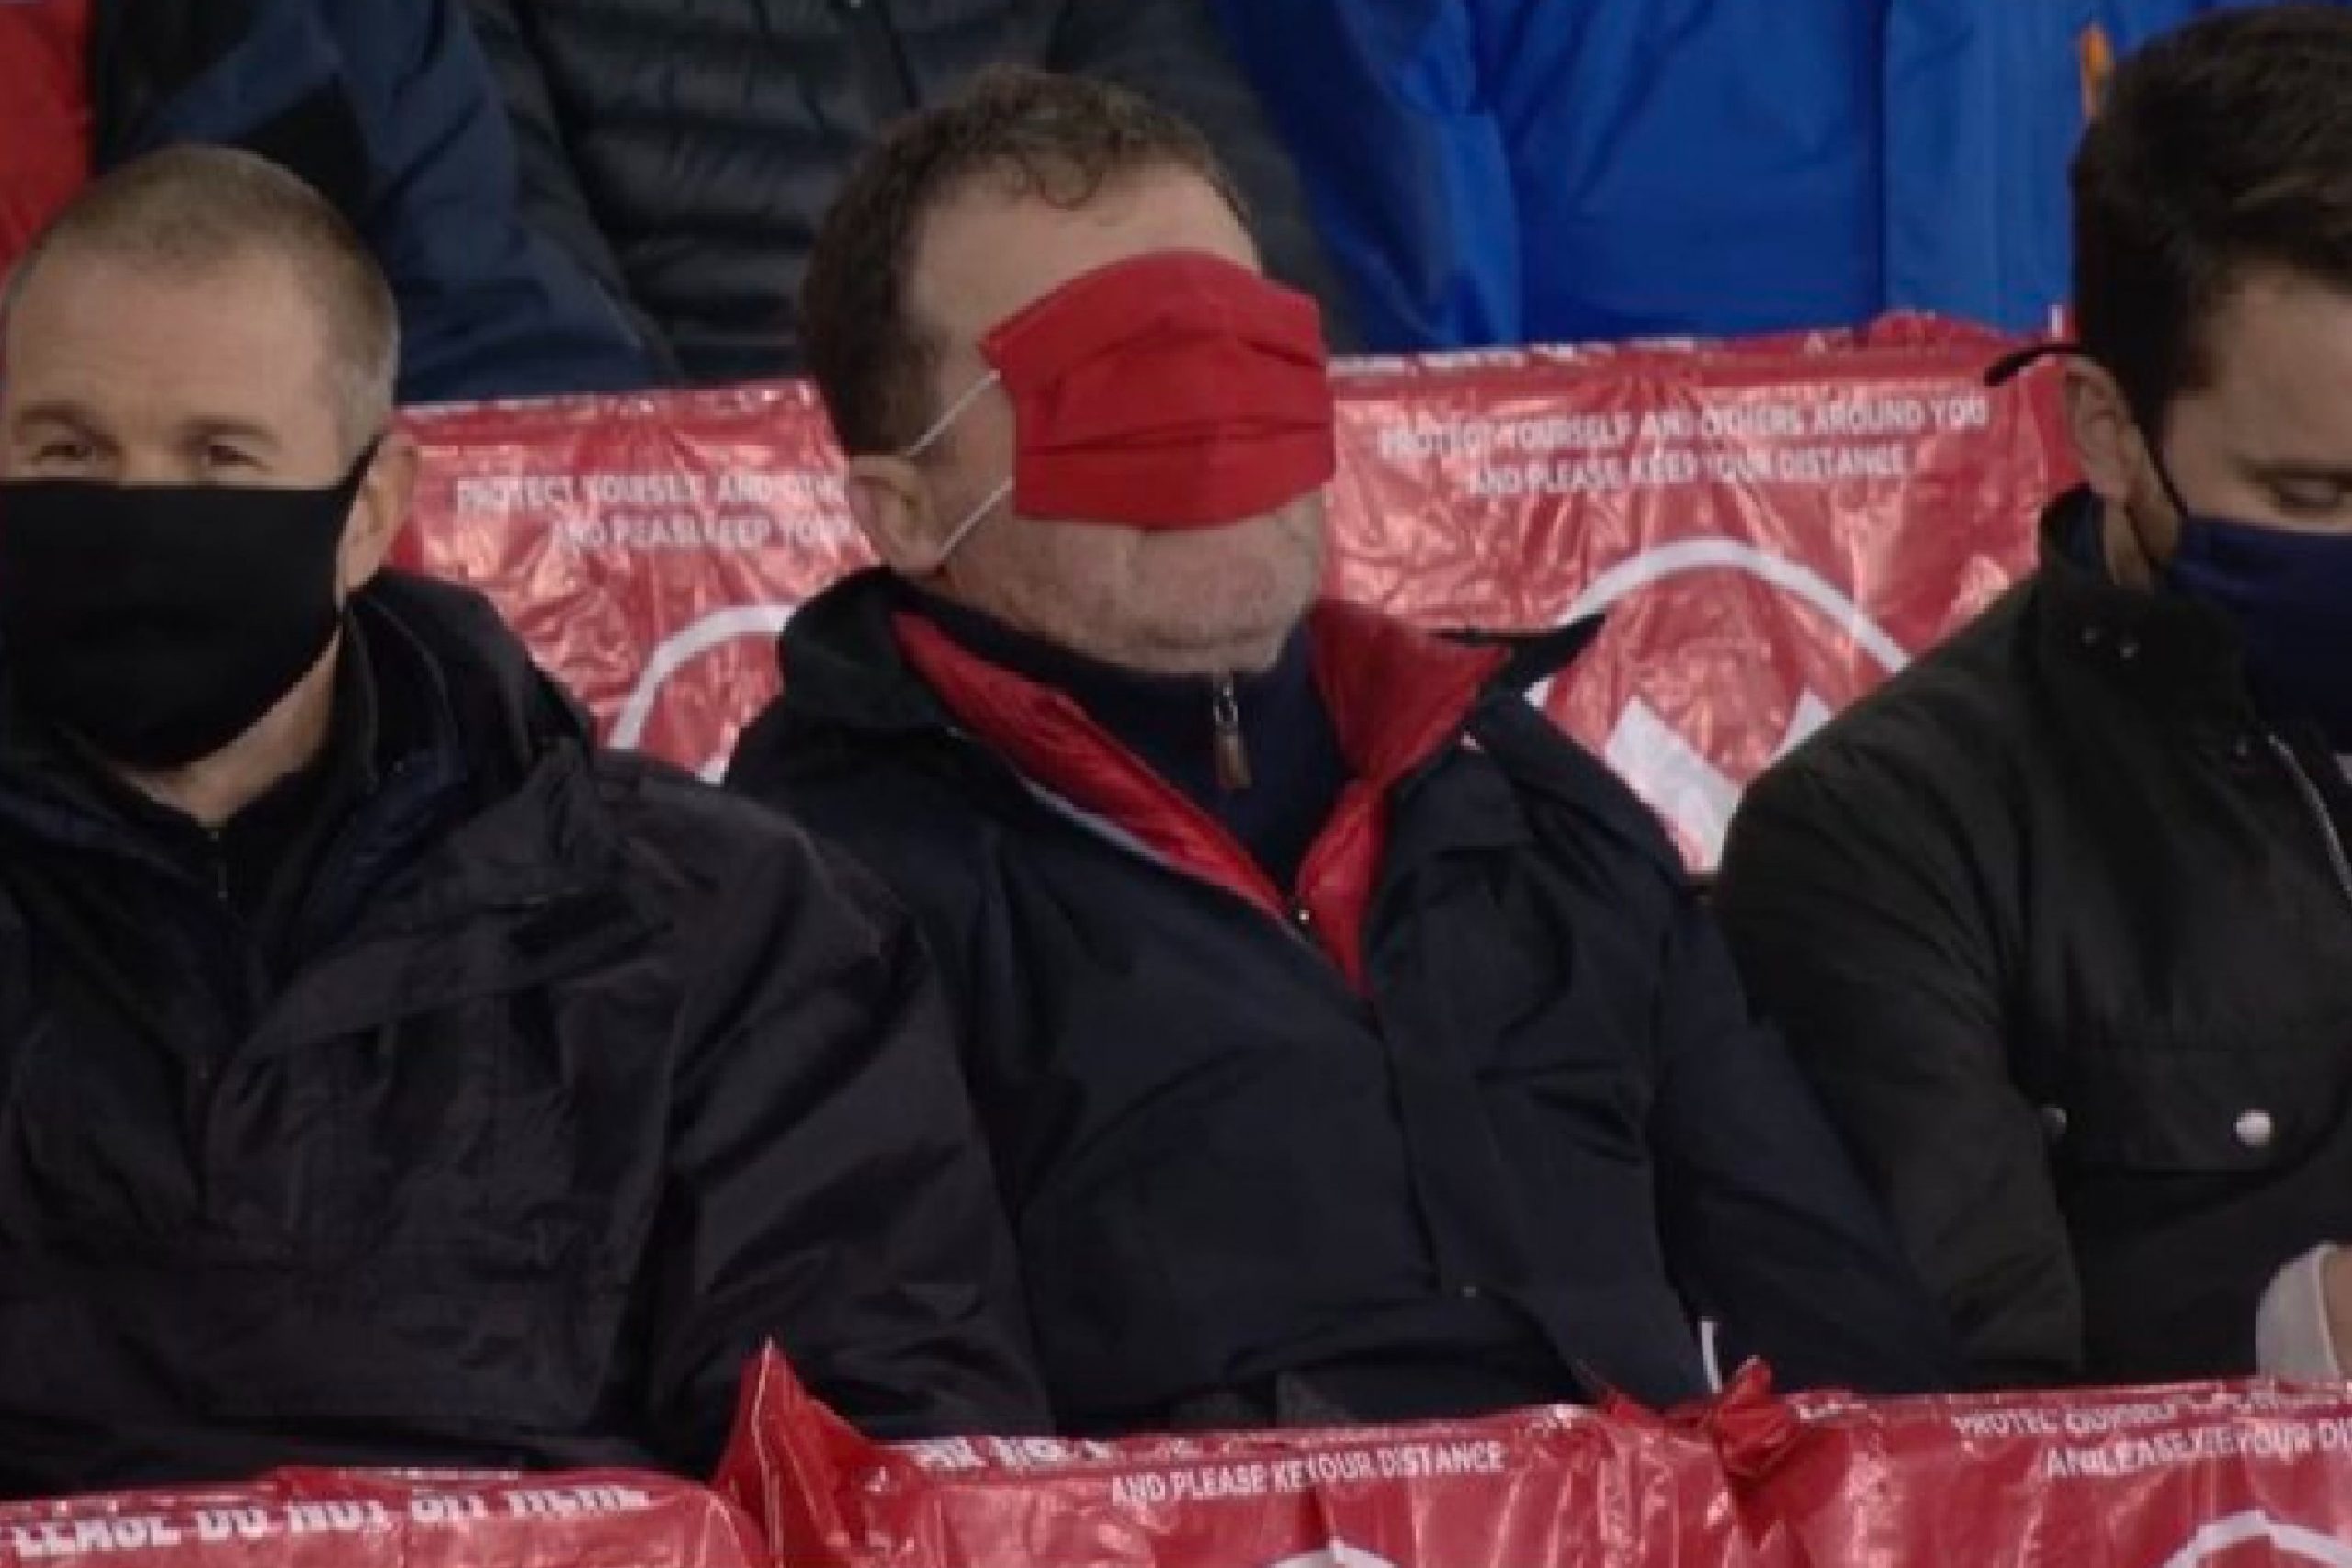 Arsenal fan covers his eyes with a face mask